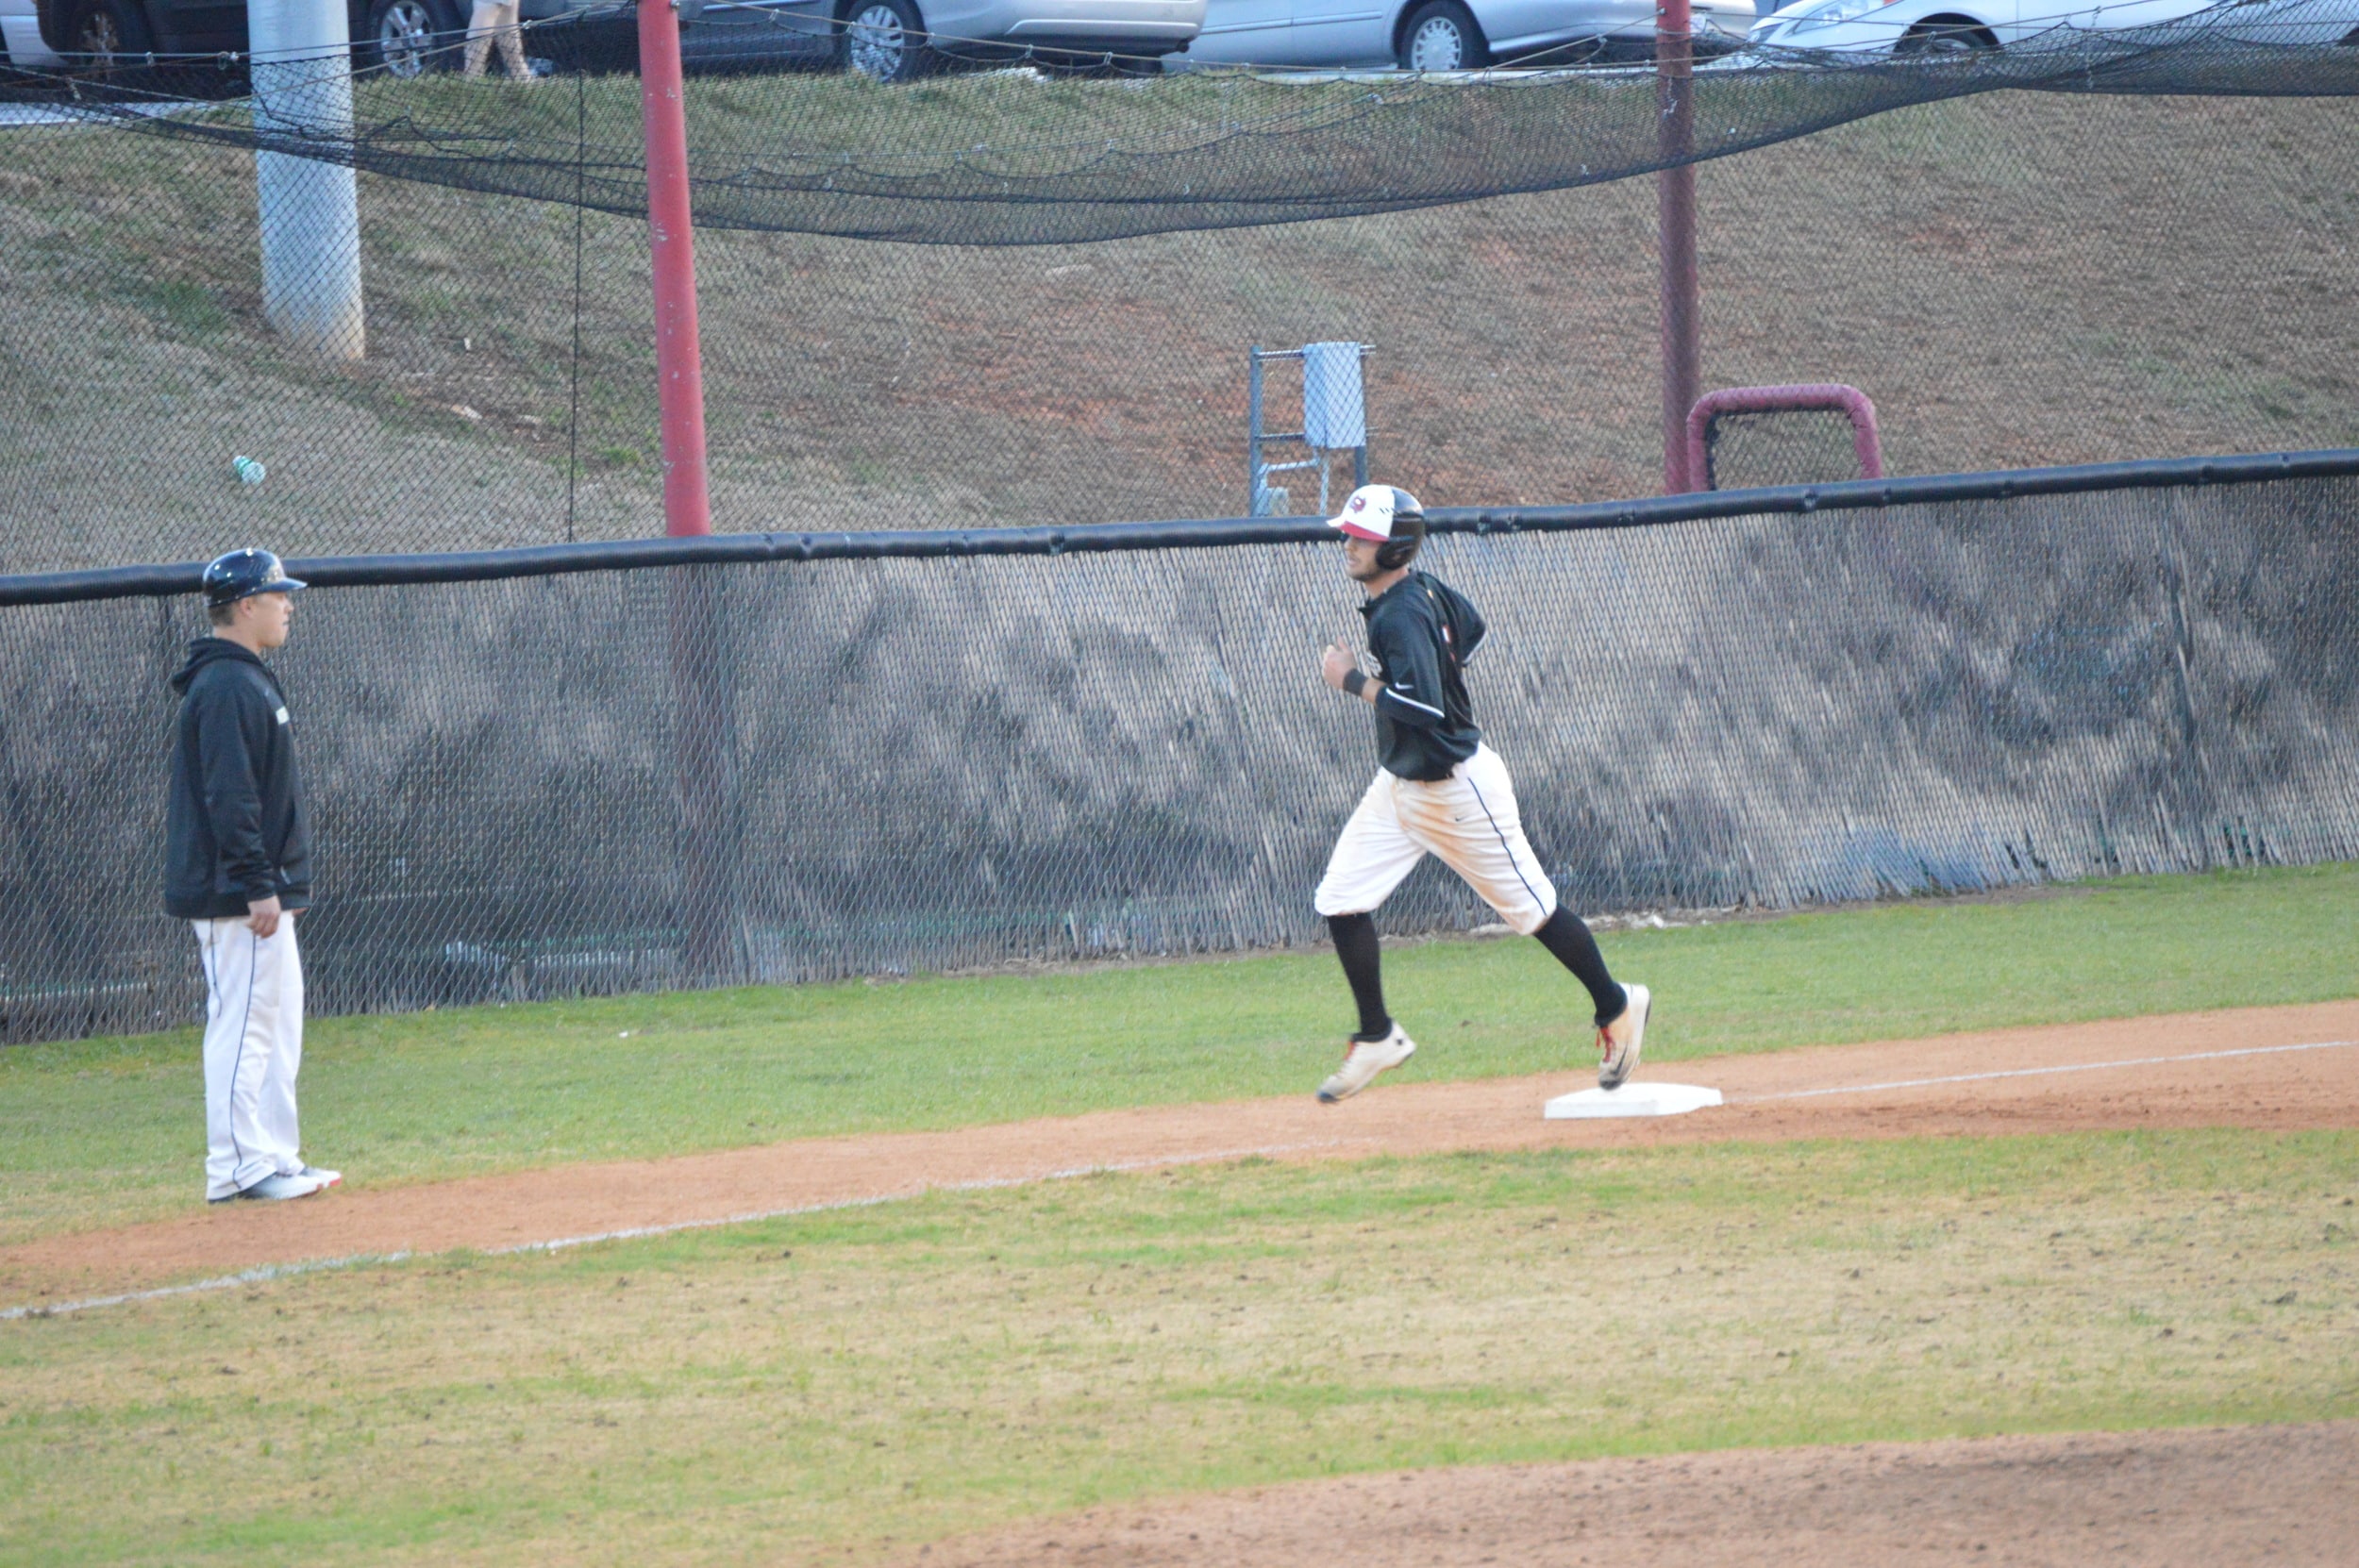 Andrew Frazier runs from third base to home plate to get the point for their team.